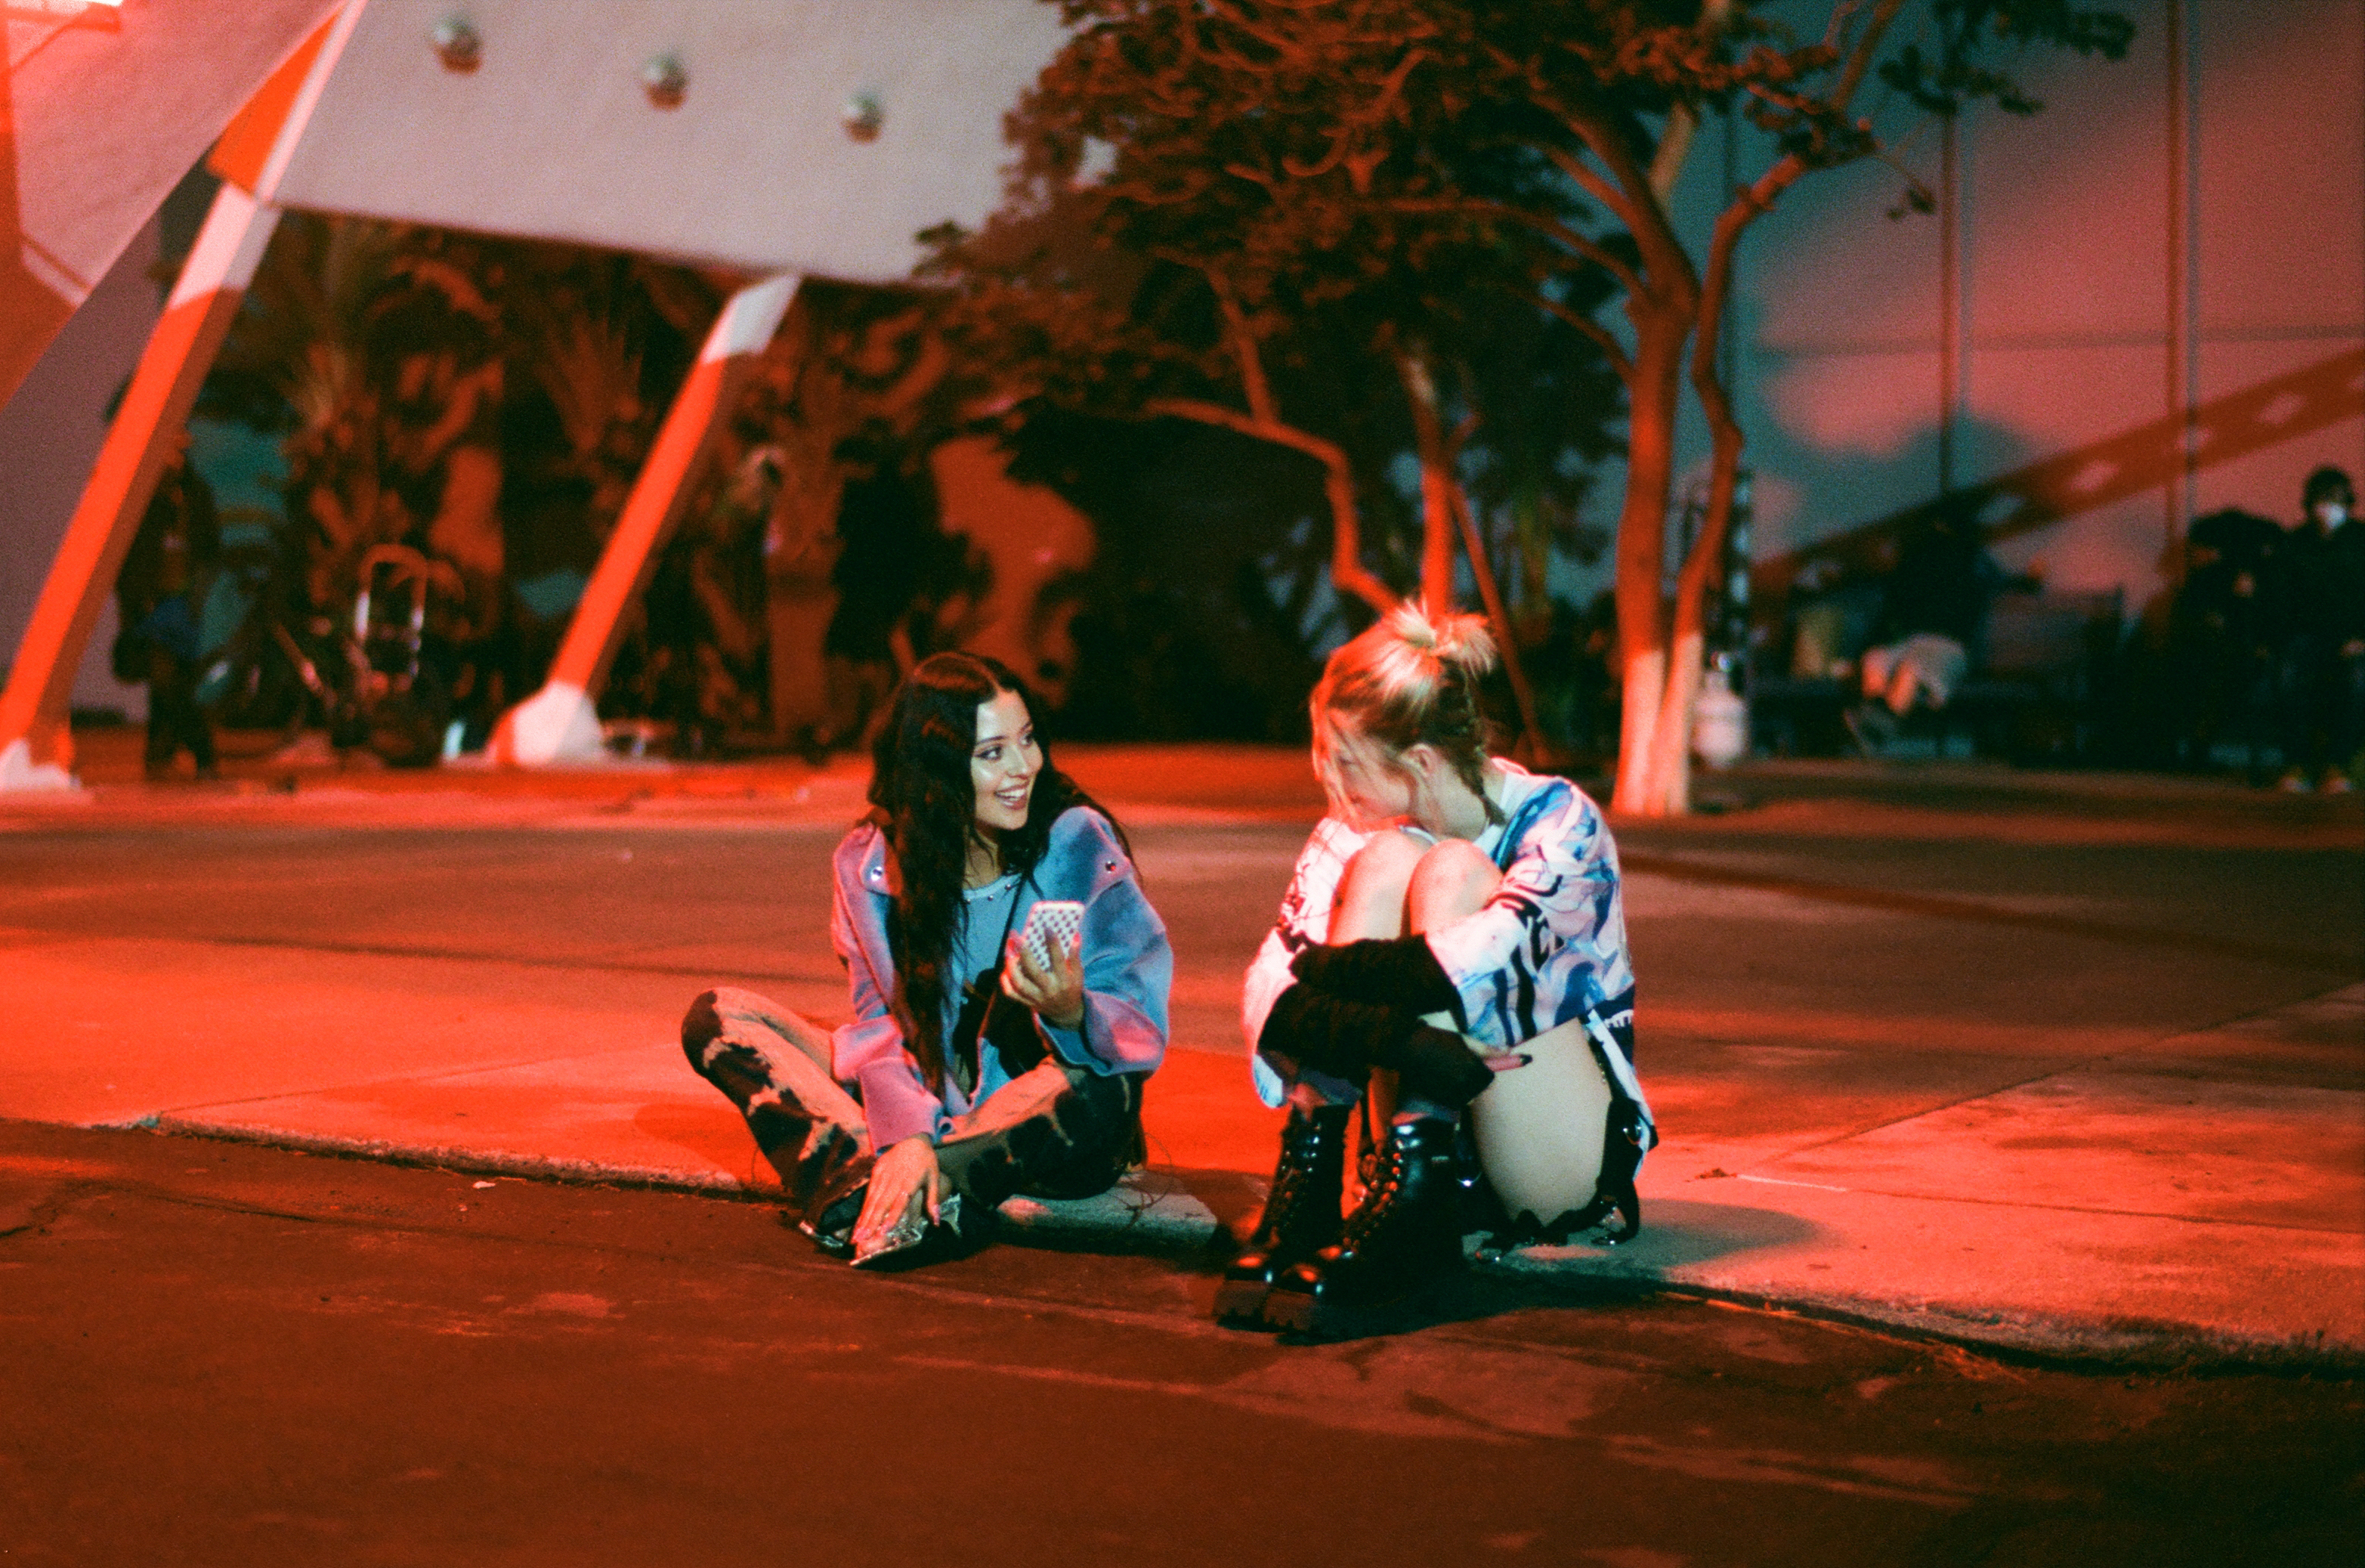 Alexa Demie and Hunter Schafer on the red-lit pavement 